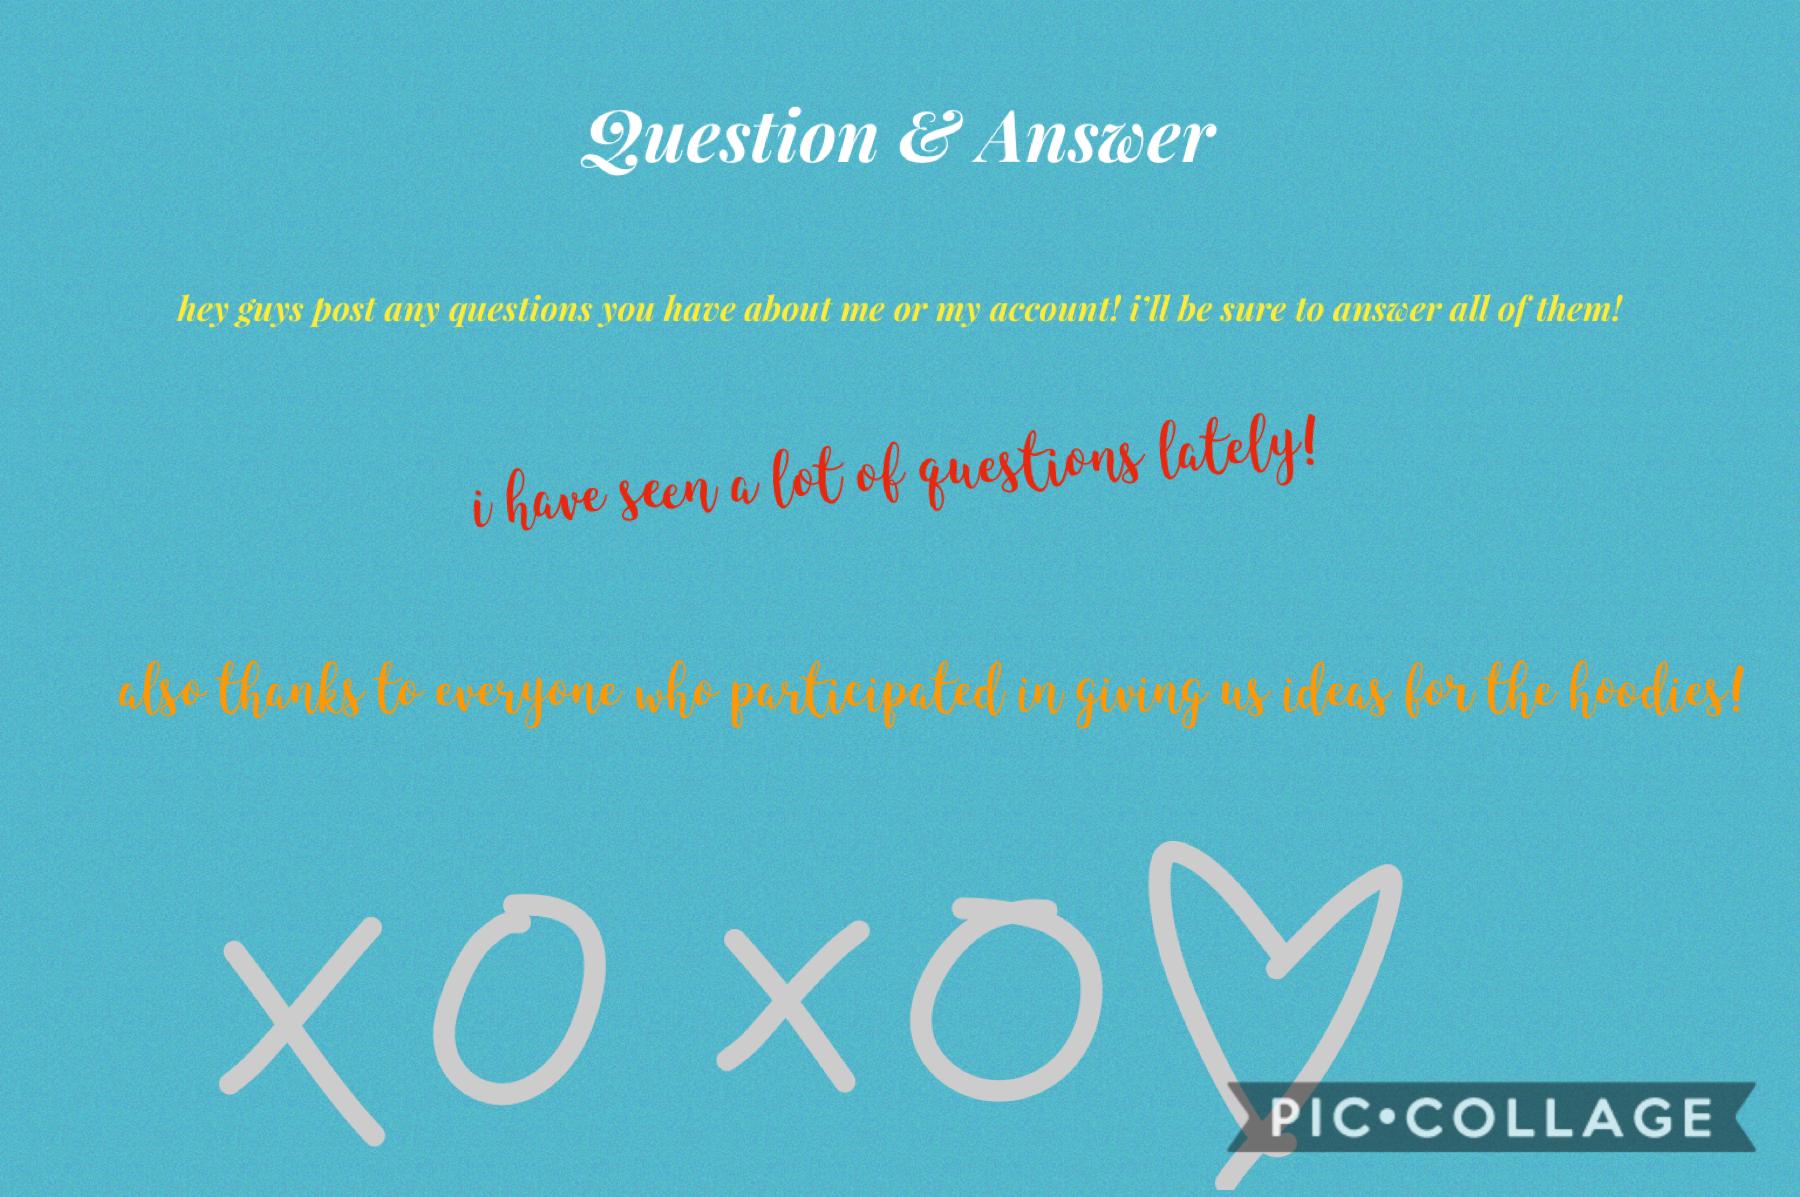 make sure to comment or remix your questions! xoxo Tidal Wave